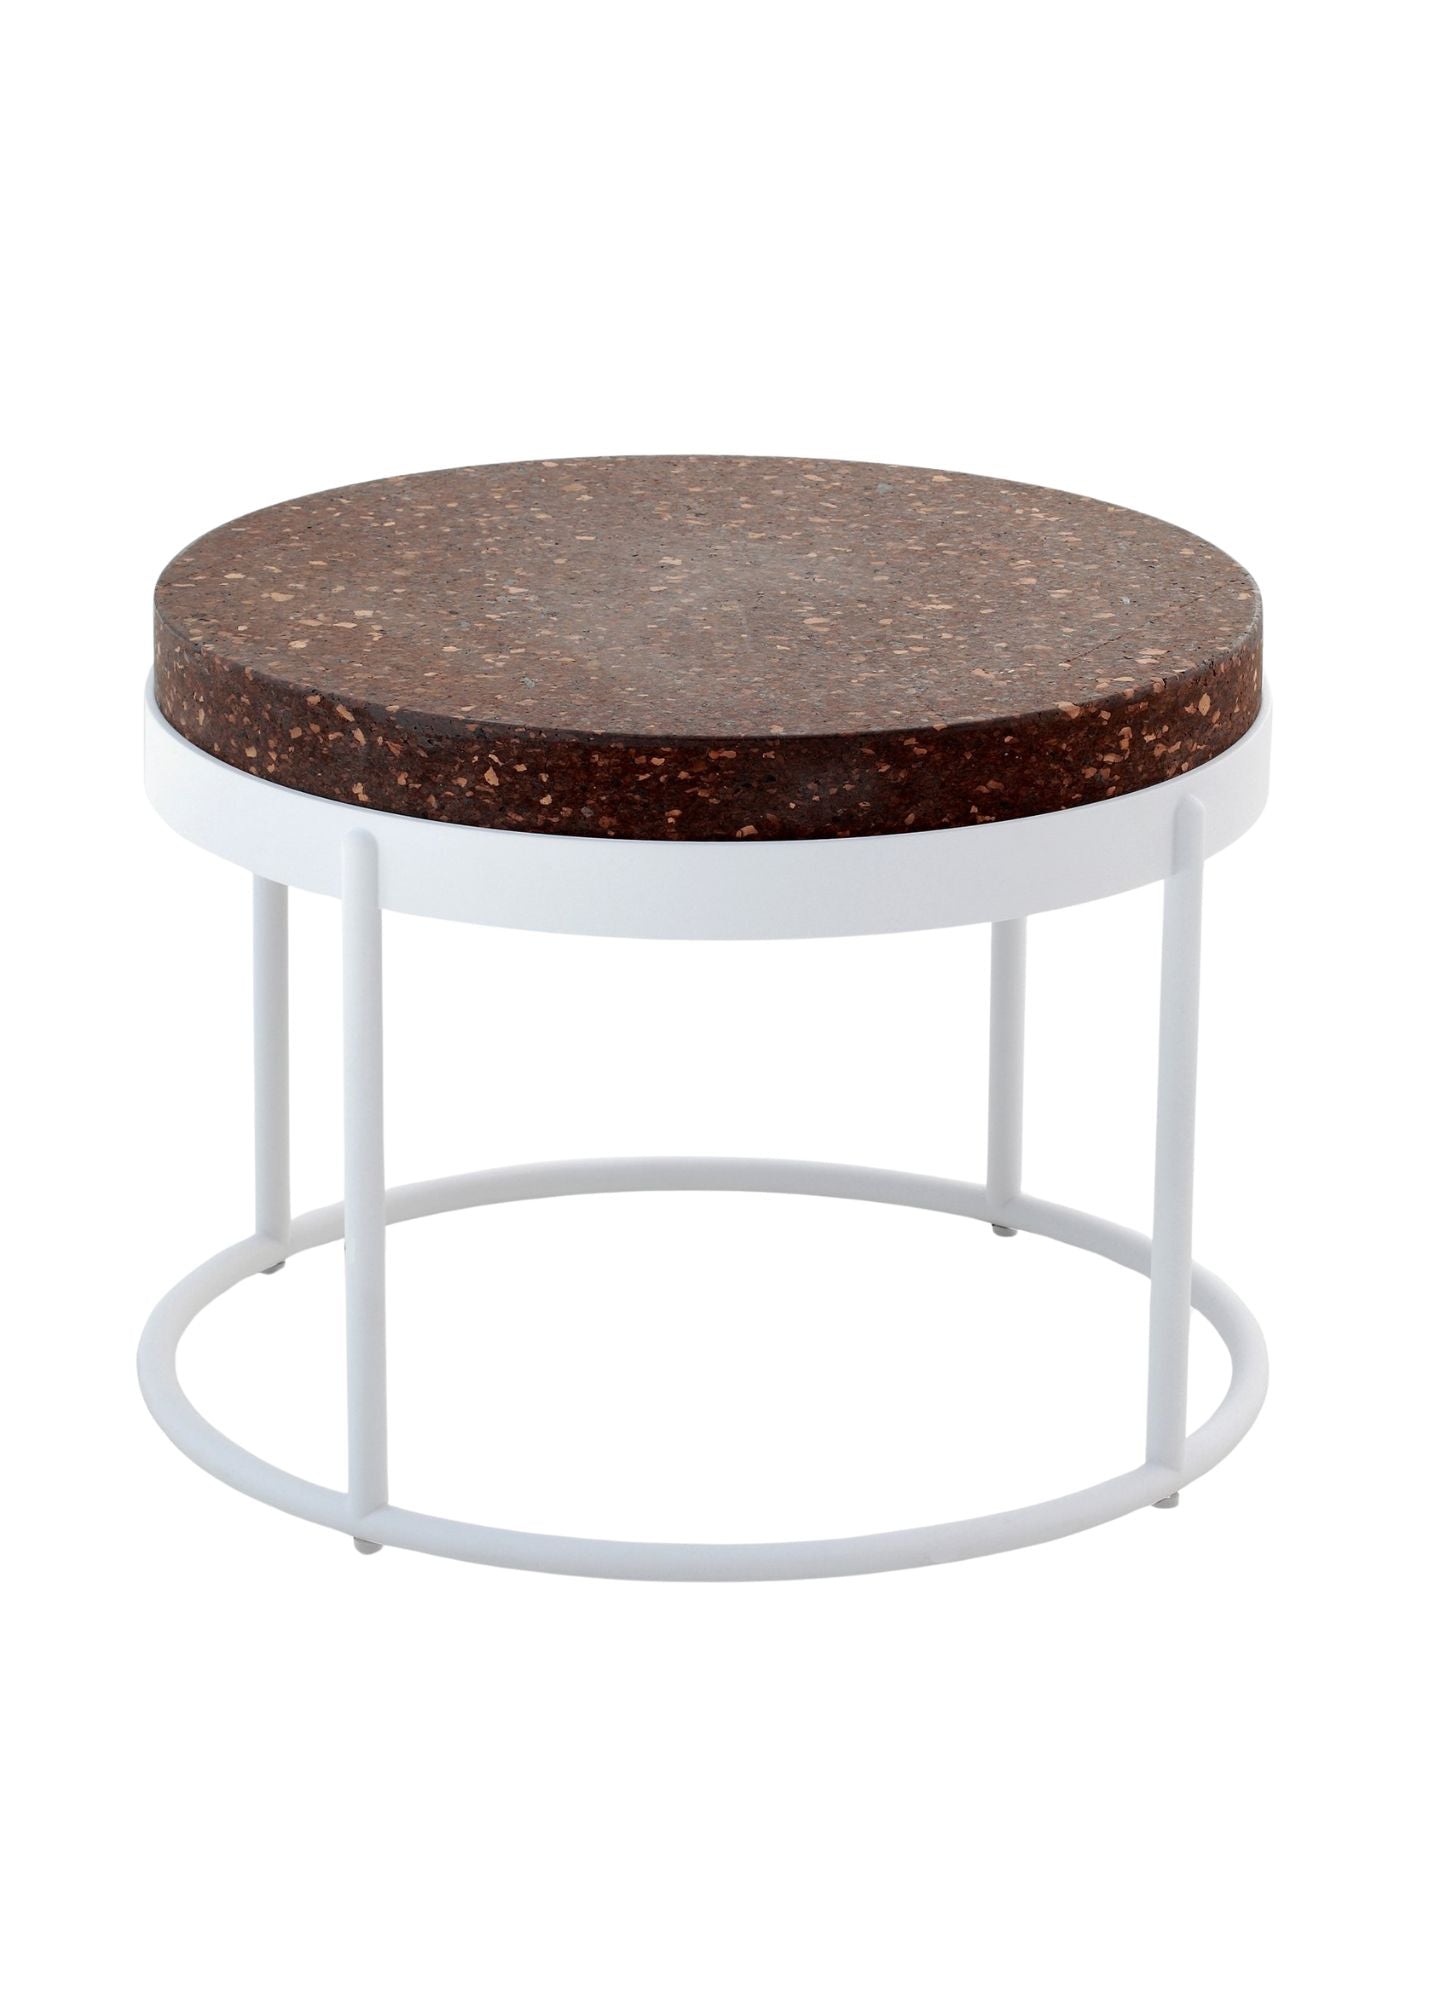 kanju interiors Wiid Design light or dark cork and white or black stainless steel end table or side table, a masterpiece in luxury home decor, featuring an expansive, sleek ceramic top with an elegant oval silhouette. Its design combines timeless elegance with contemporary flair, set on a minimalist base for a floating effect. Perfect for upscale dining rooms, this table embodies sophisticated style and the fine craftsmanship of African design, appealing to those who appreciate unique, artisanal furniture.